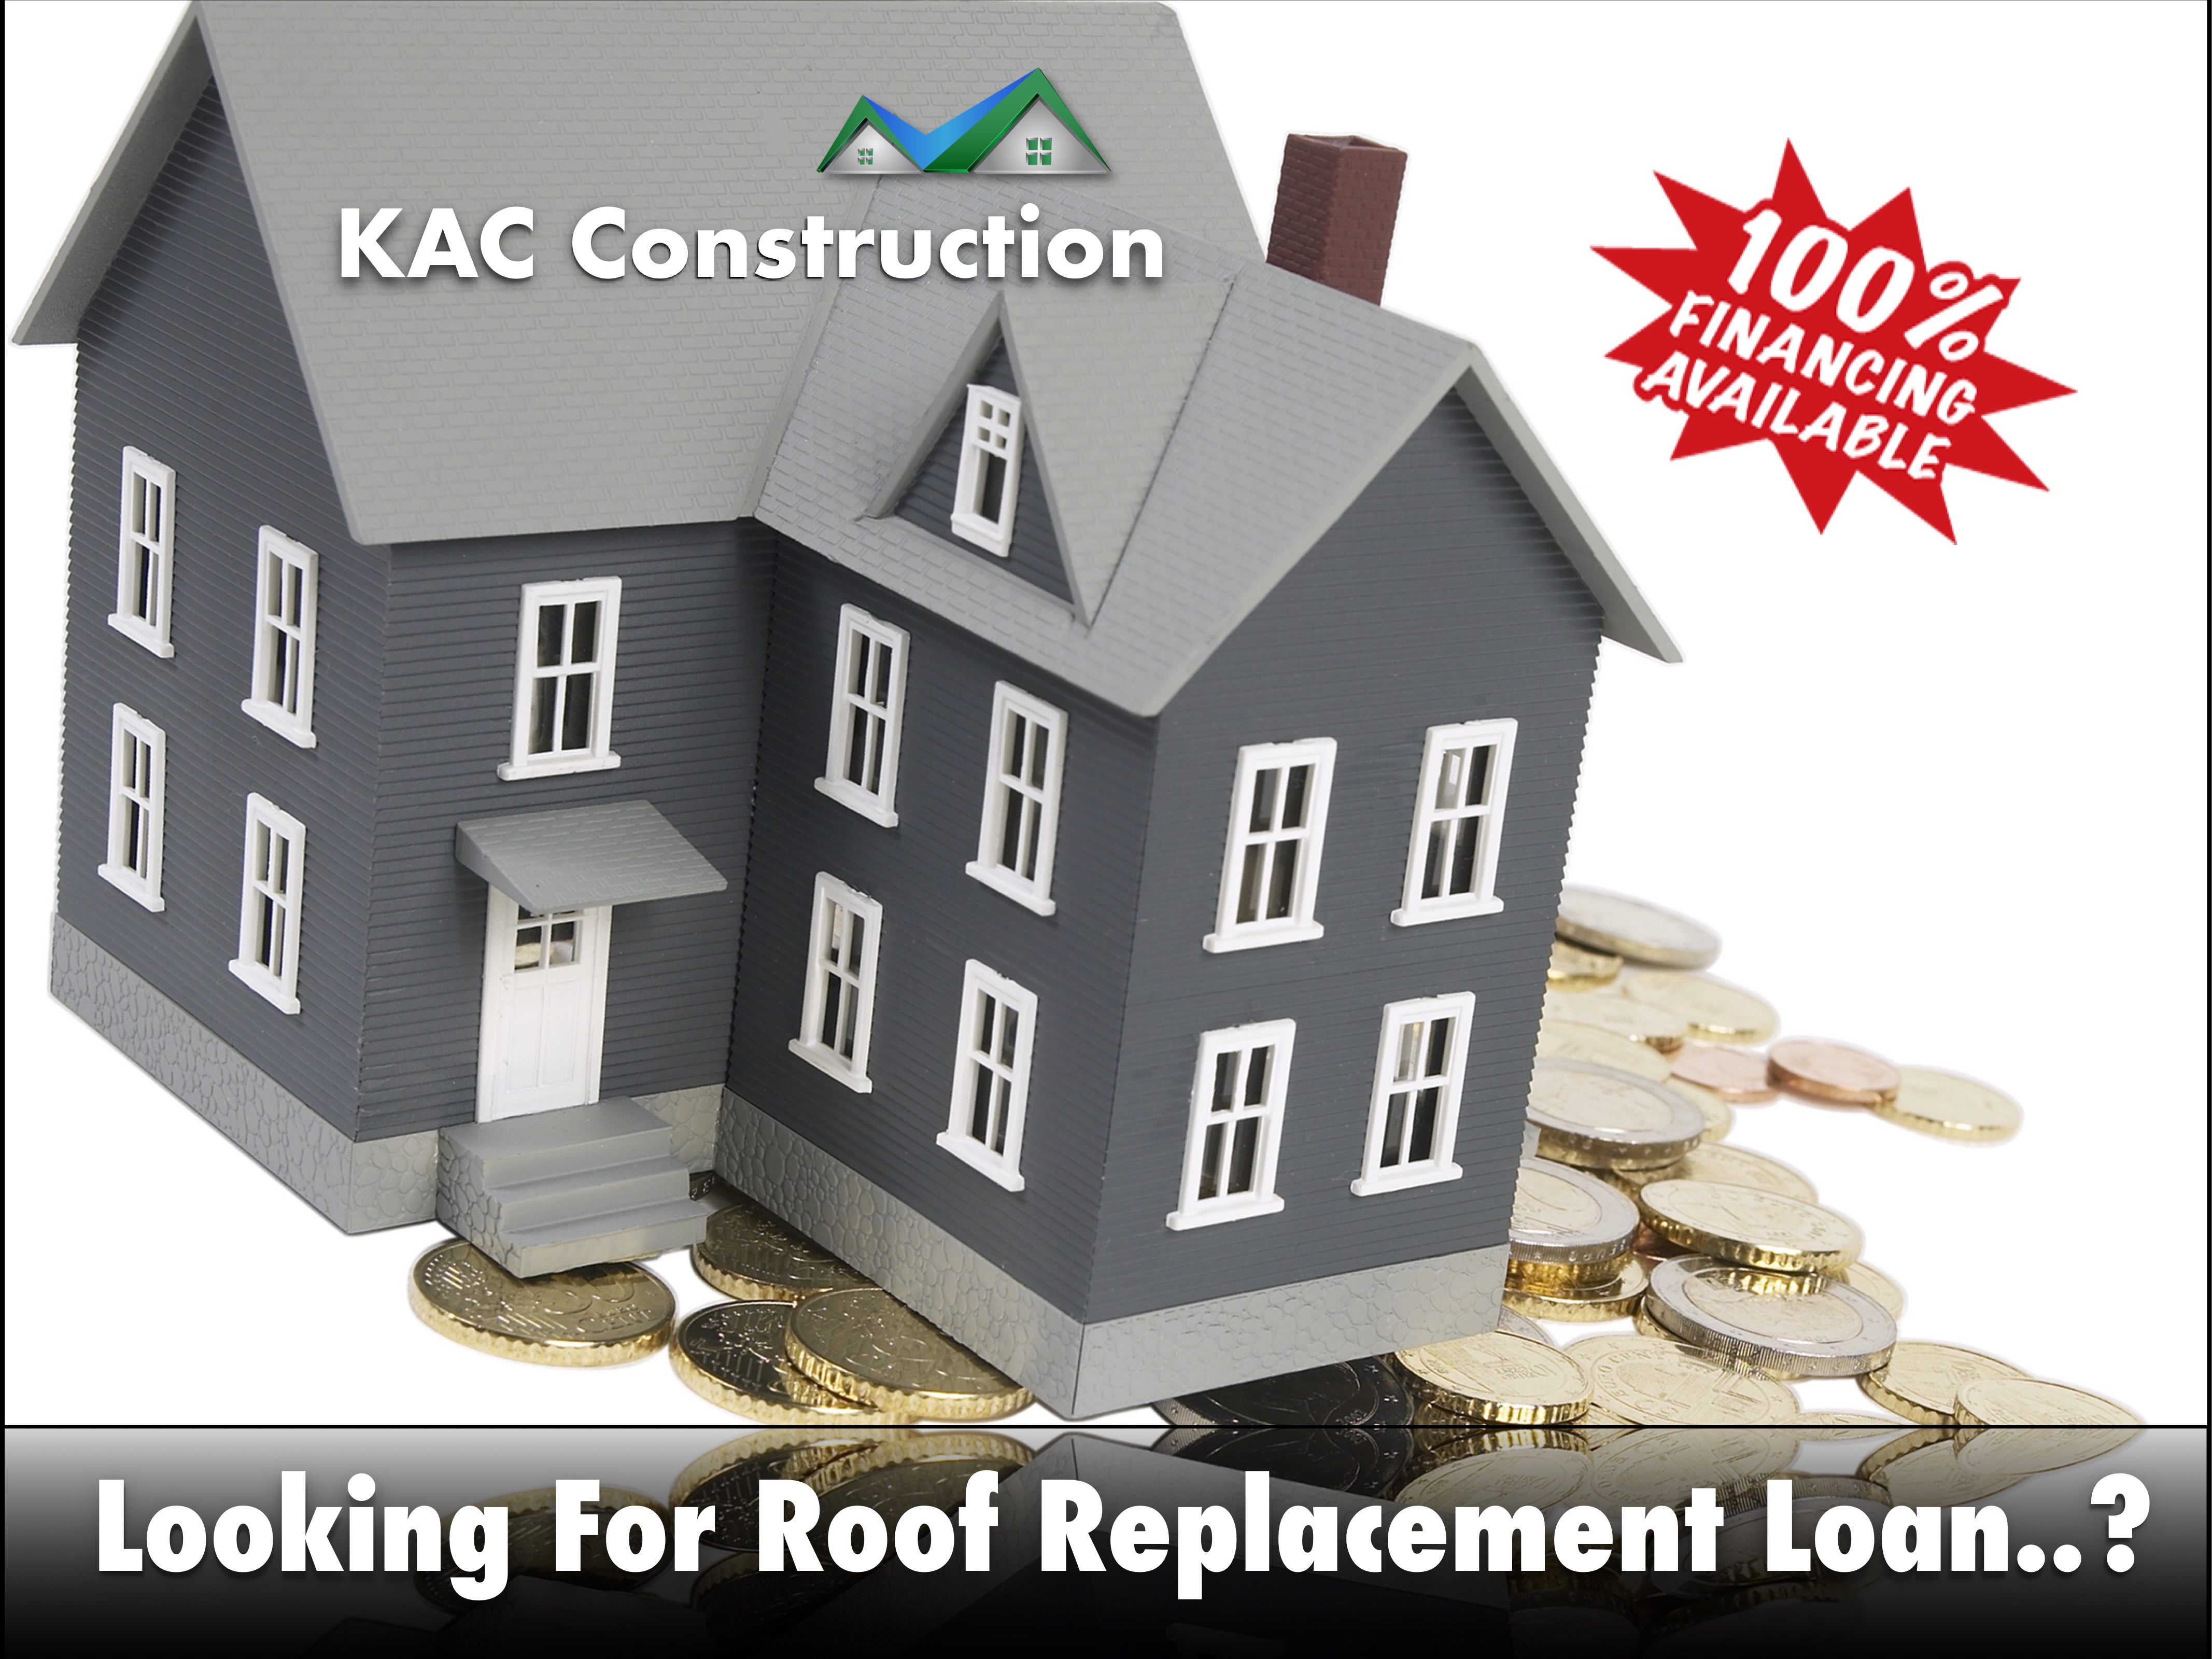 Roof Loan ri, roof replacement loan, roof replacement loan ri, roof financing ri, roof replacement financing ri,easy roof loan ri, easy roof financing ri, best roof Loan ri, best roofing financing ri,